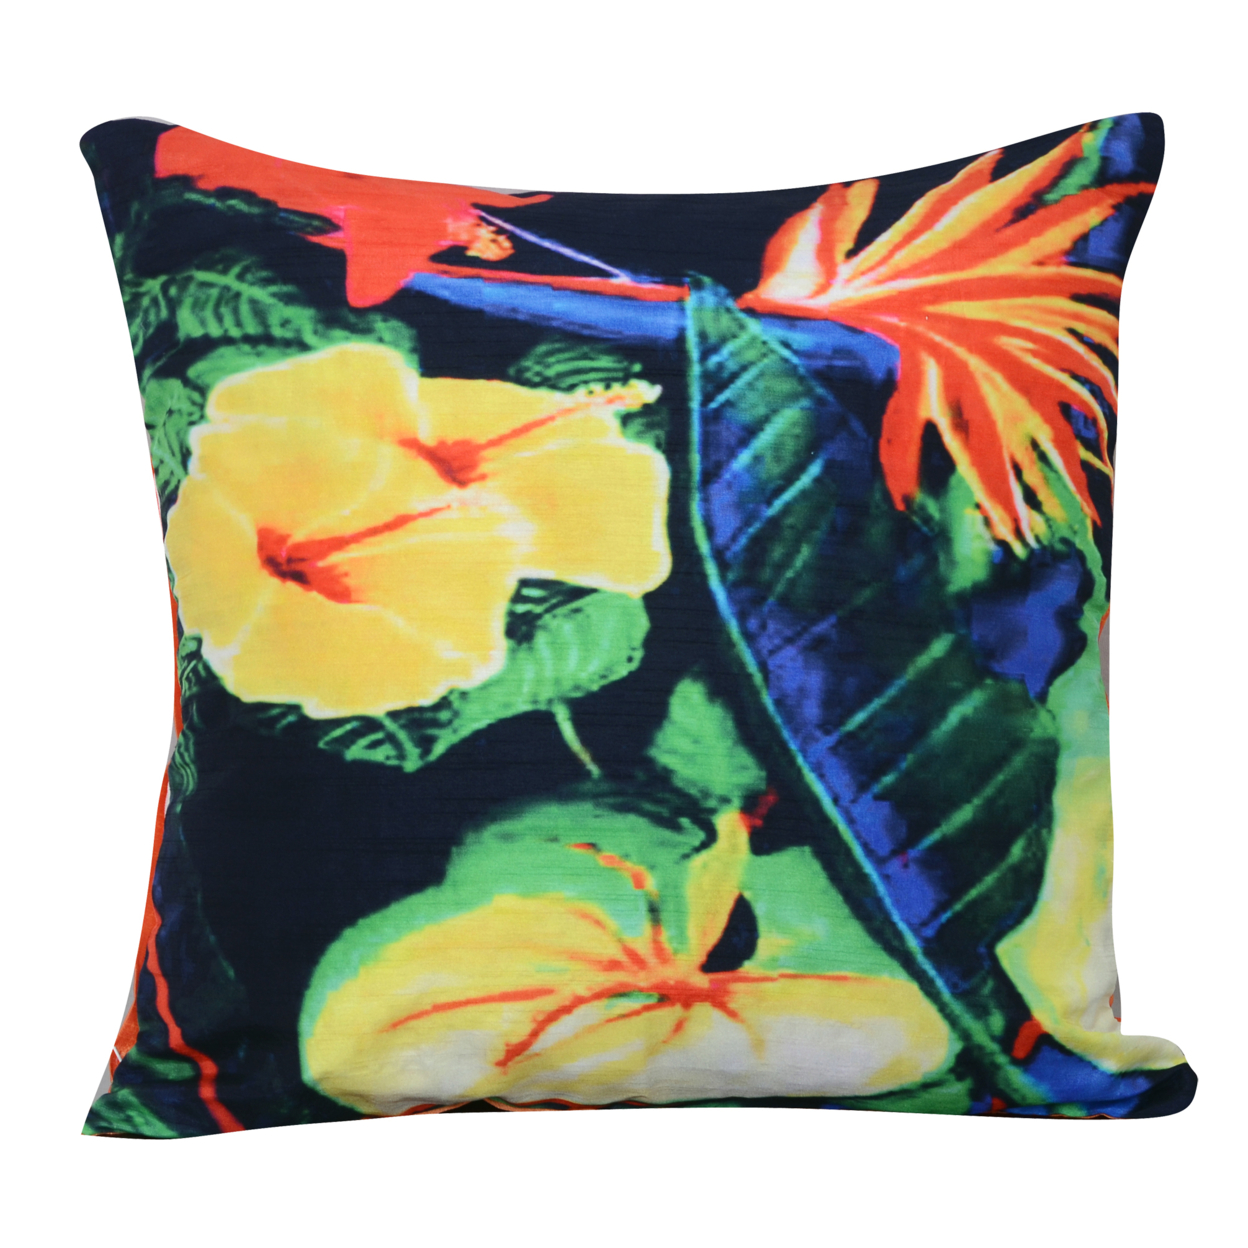 20 X 20 Inch Tropical Pillow With Digital Print, Set Of 2, Yellow And Blue- Saltoro Sherpi